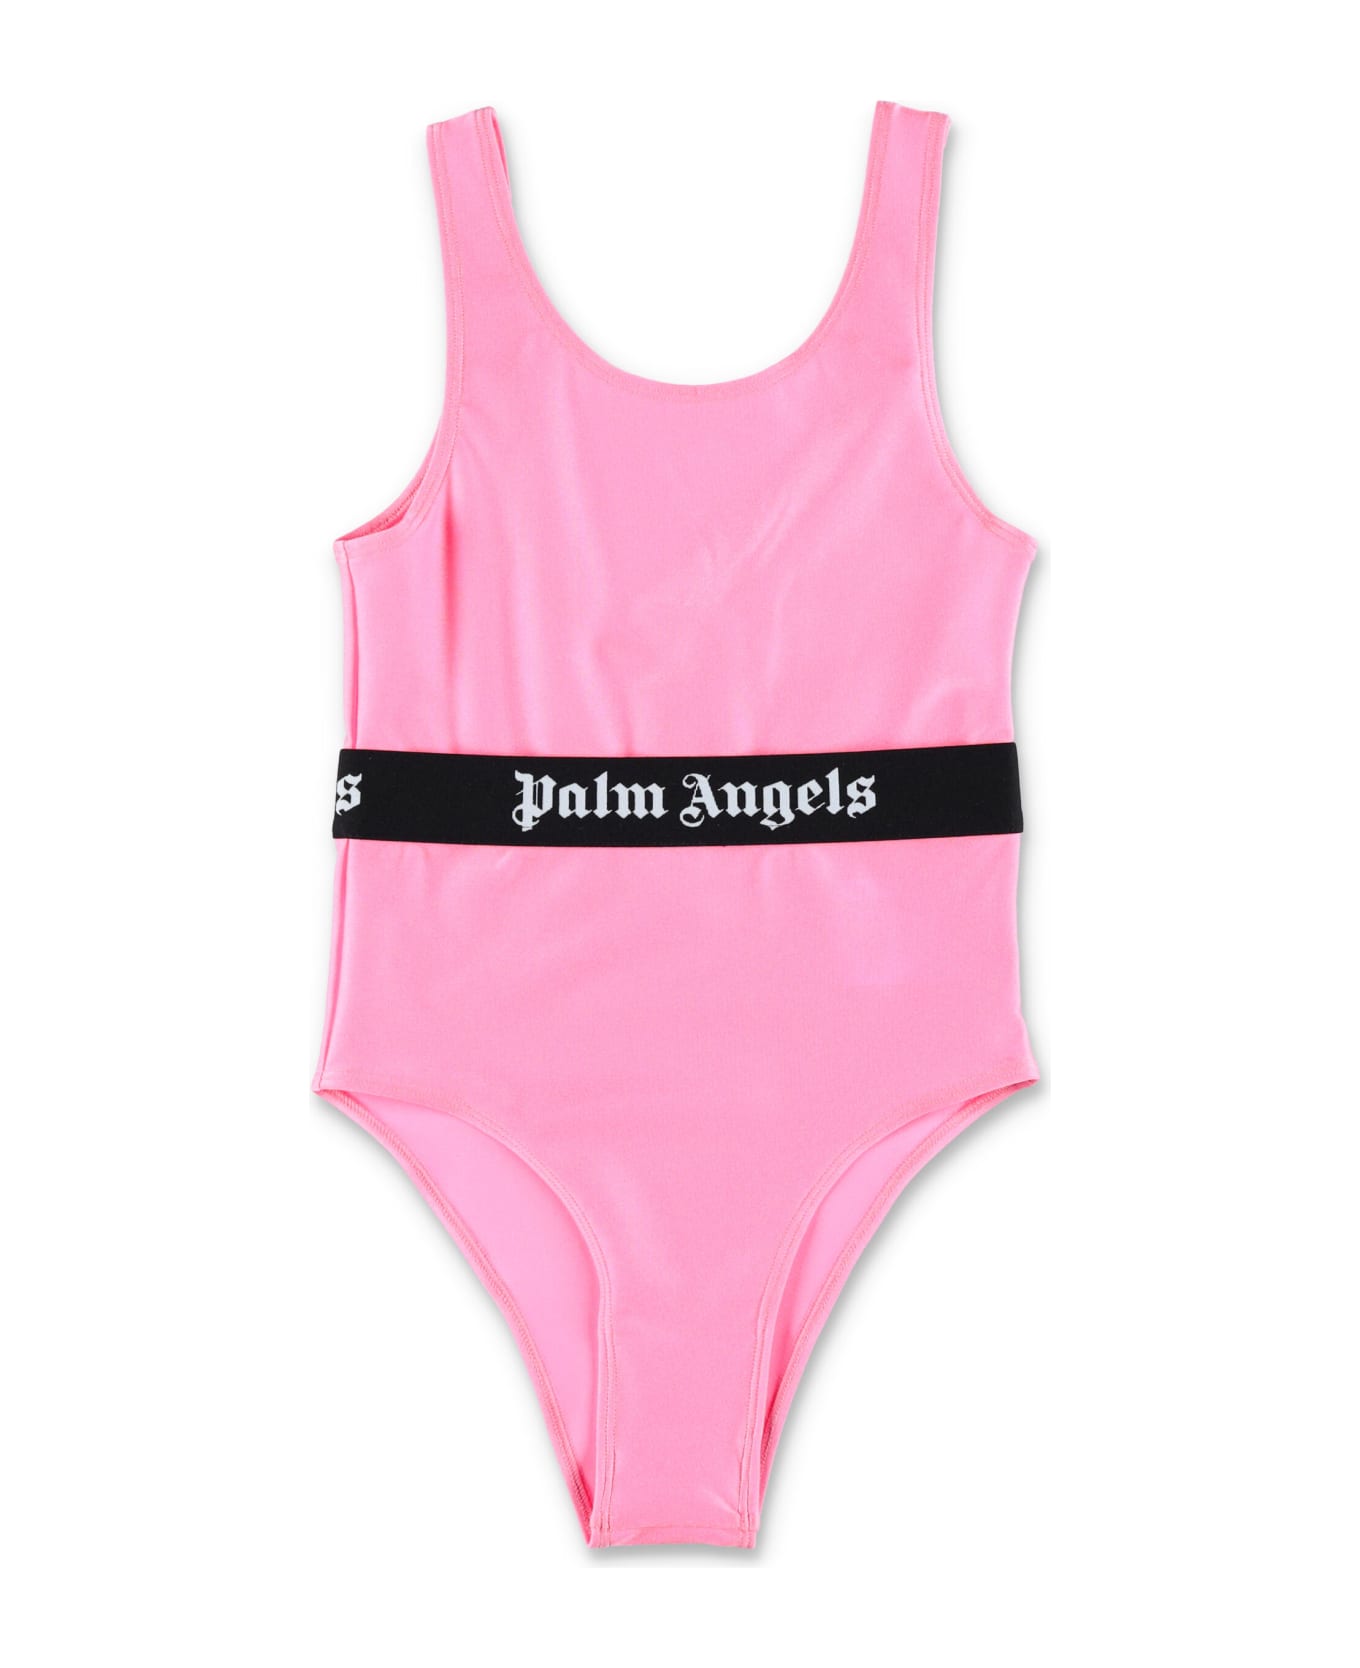 Palm Angels Logo Band Swimsuit - PINK